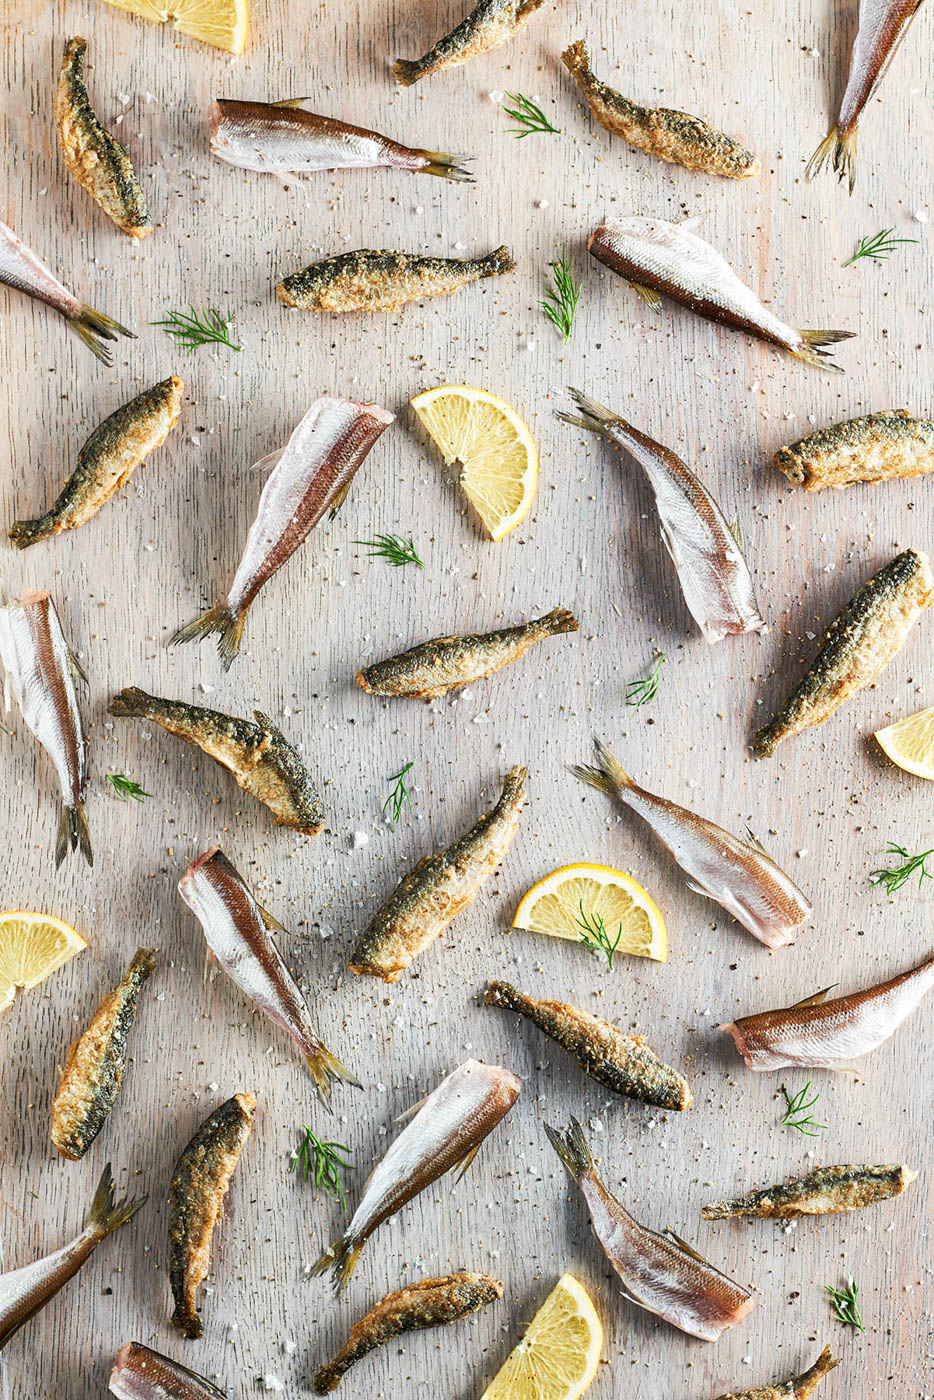 Raw_and_fried_vendace_with_dills_and_sliced_lemon_and_peppers_on_a_table_For_Kespro's_Menu_magazine_by_Elina_Himanen